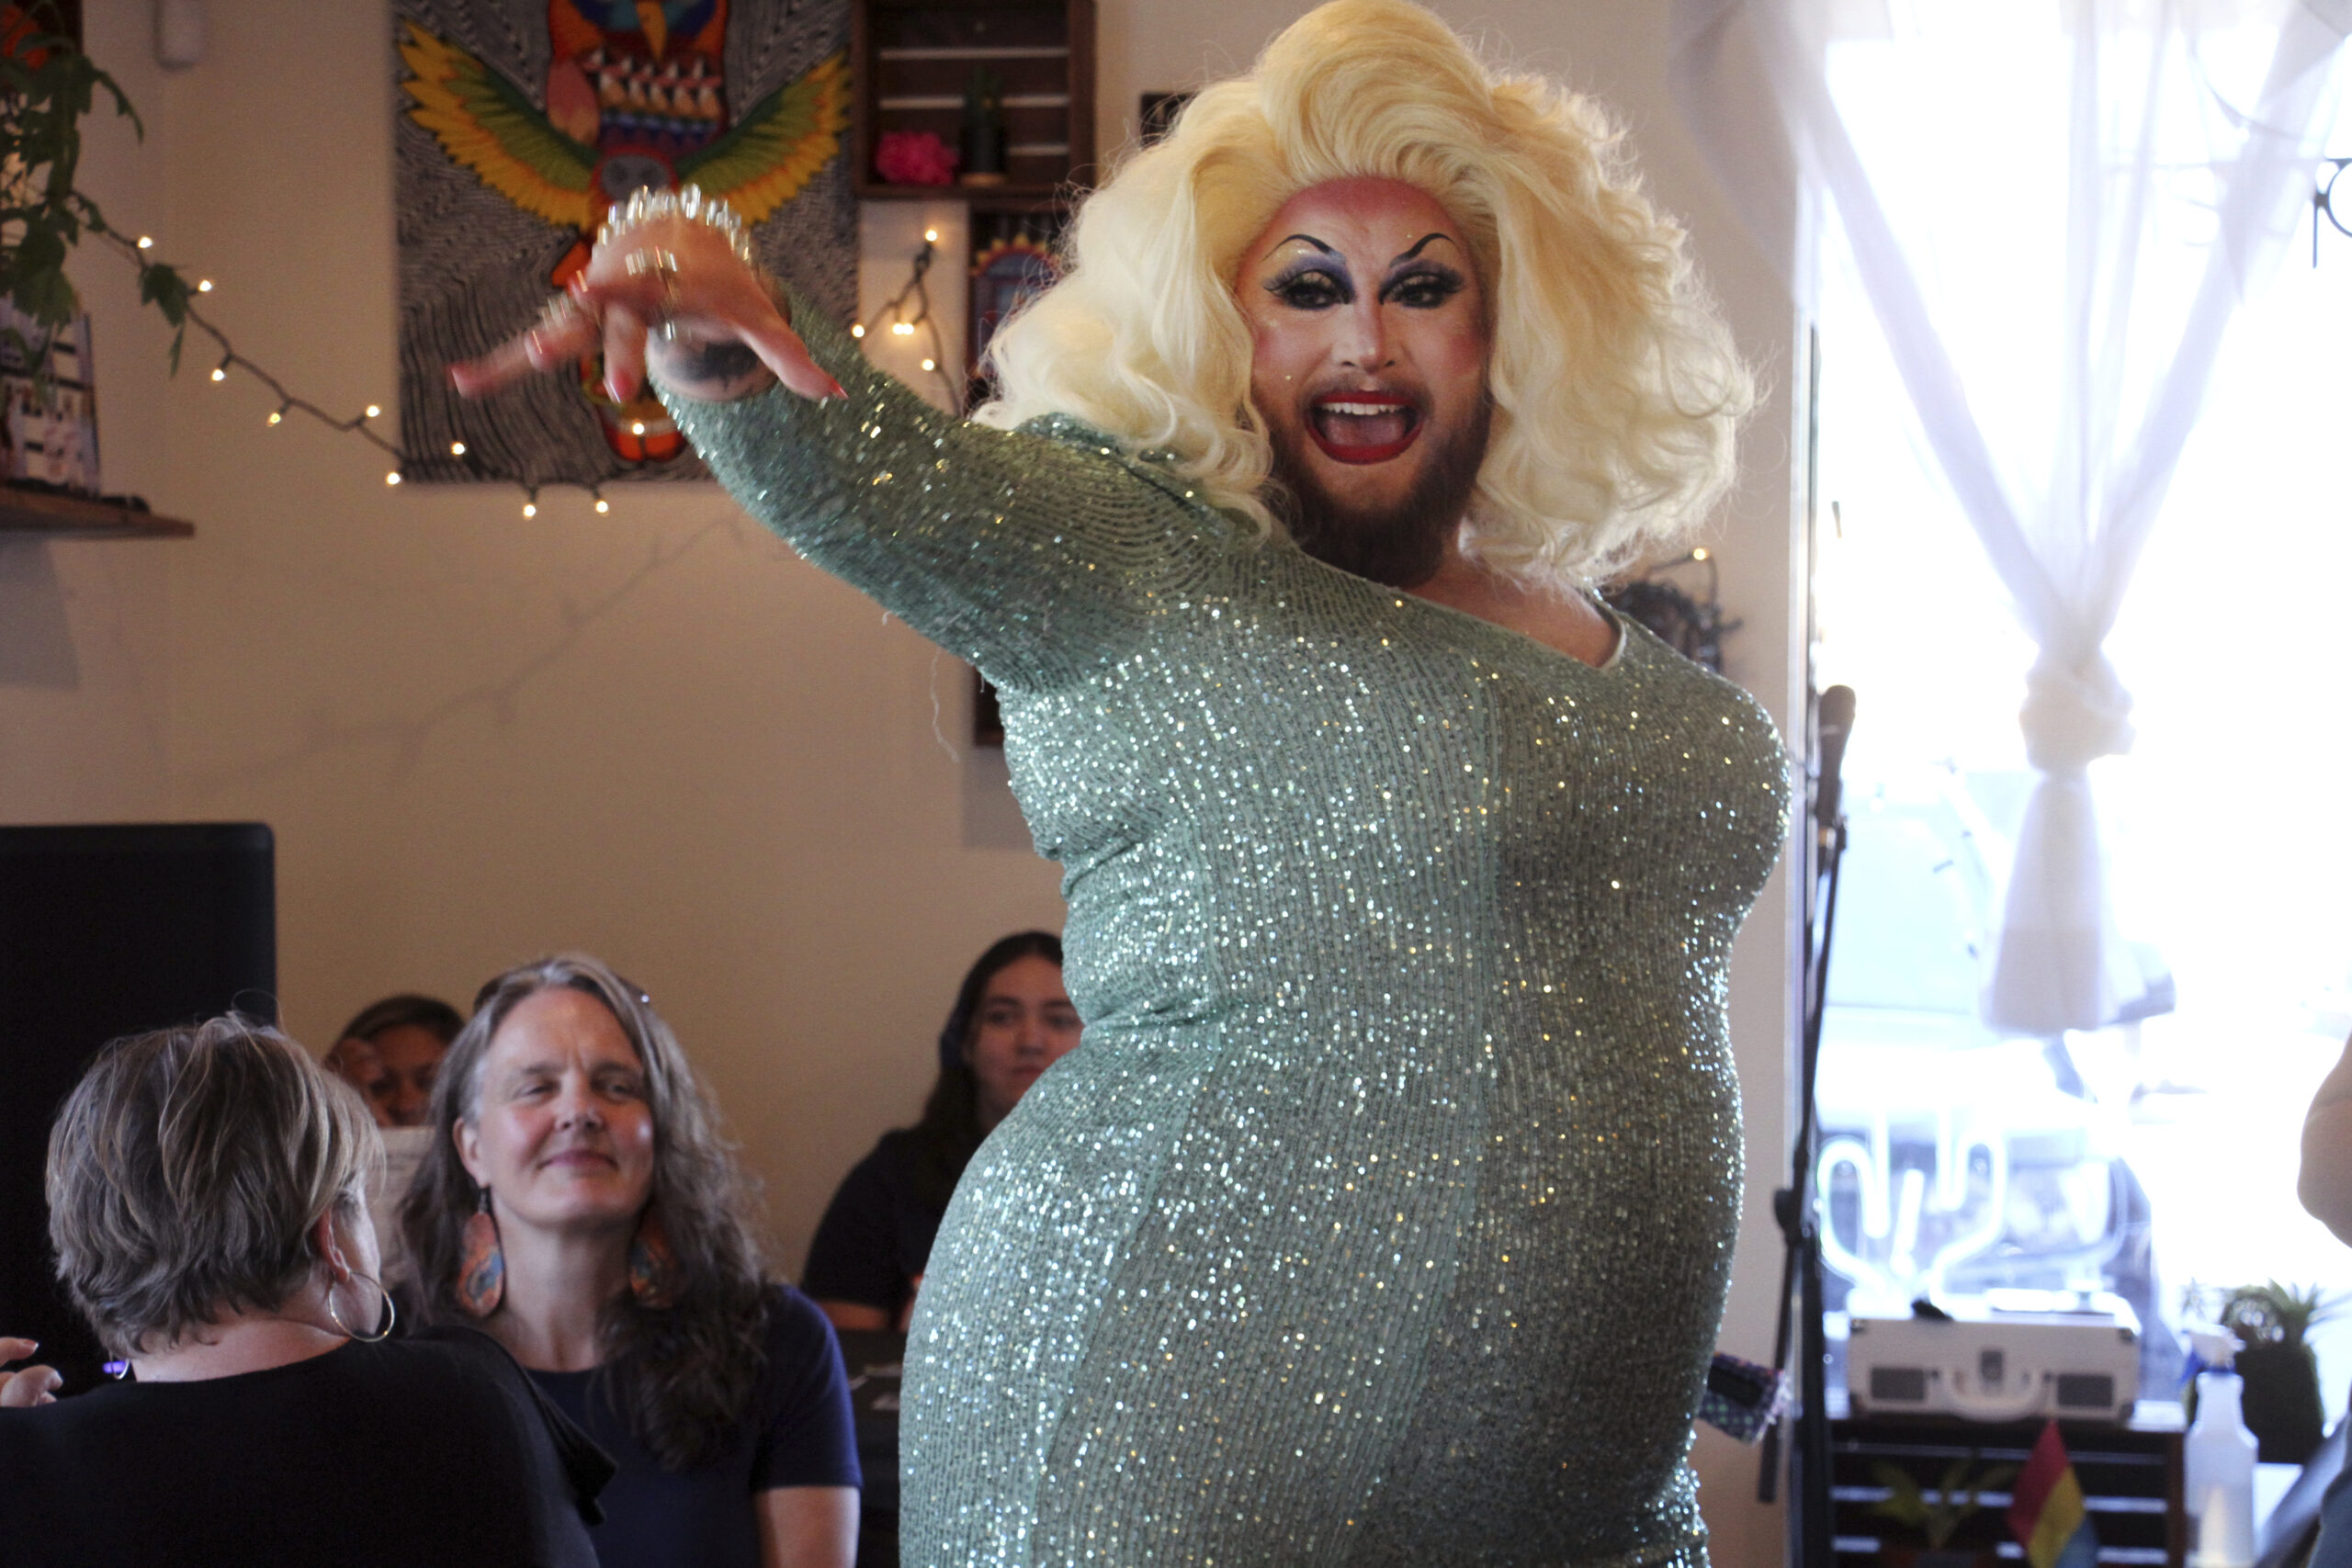 a person cheers while wearing a blonde wig and sparkly body suit